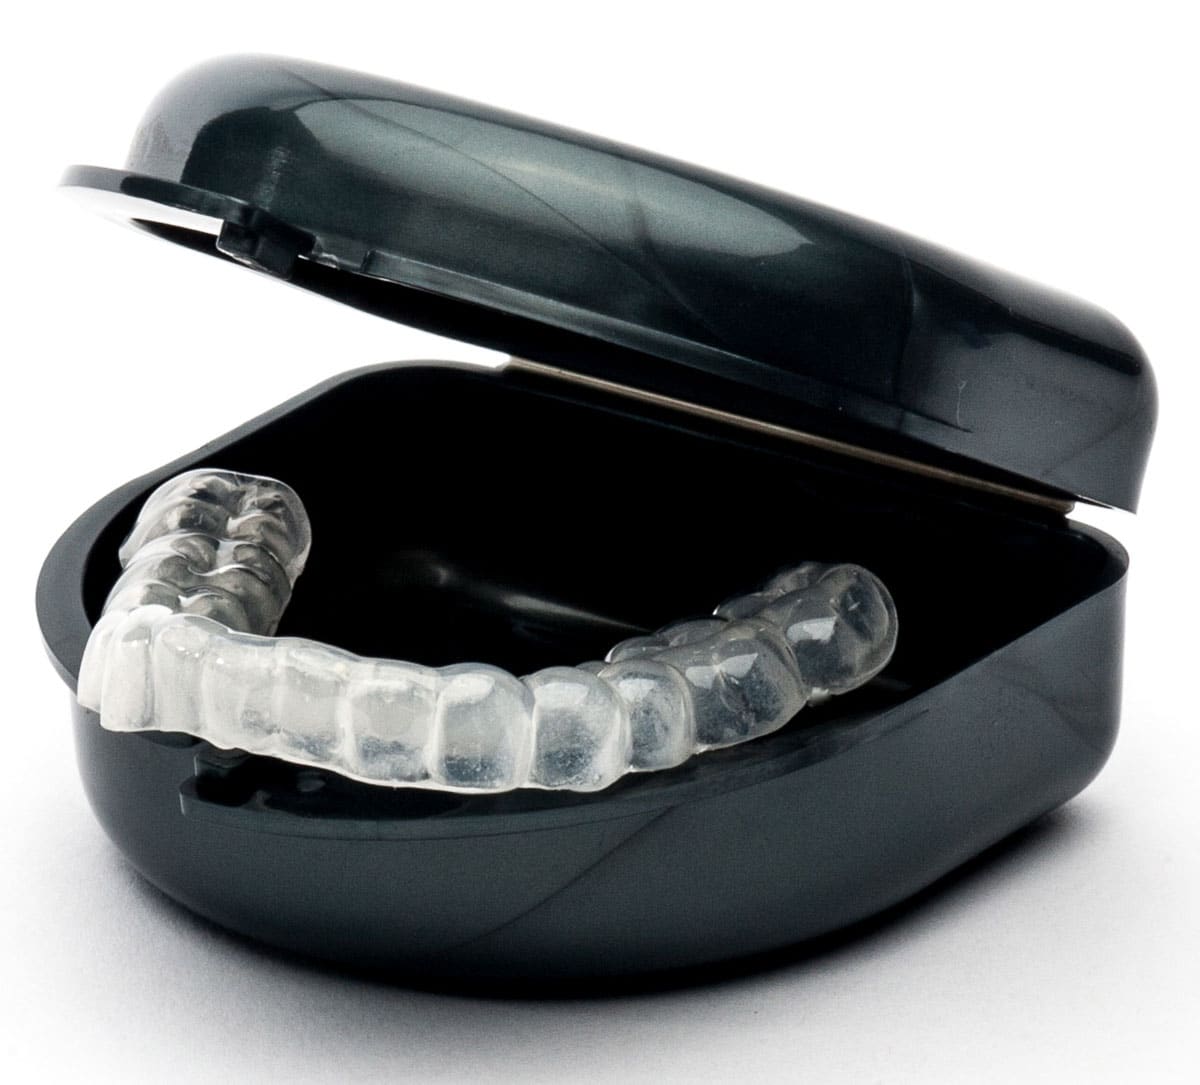 use a plastic case after cleaning mouth guard